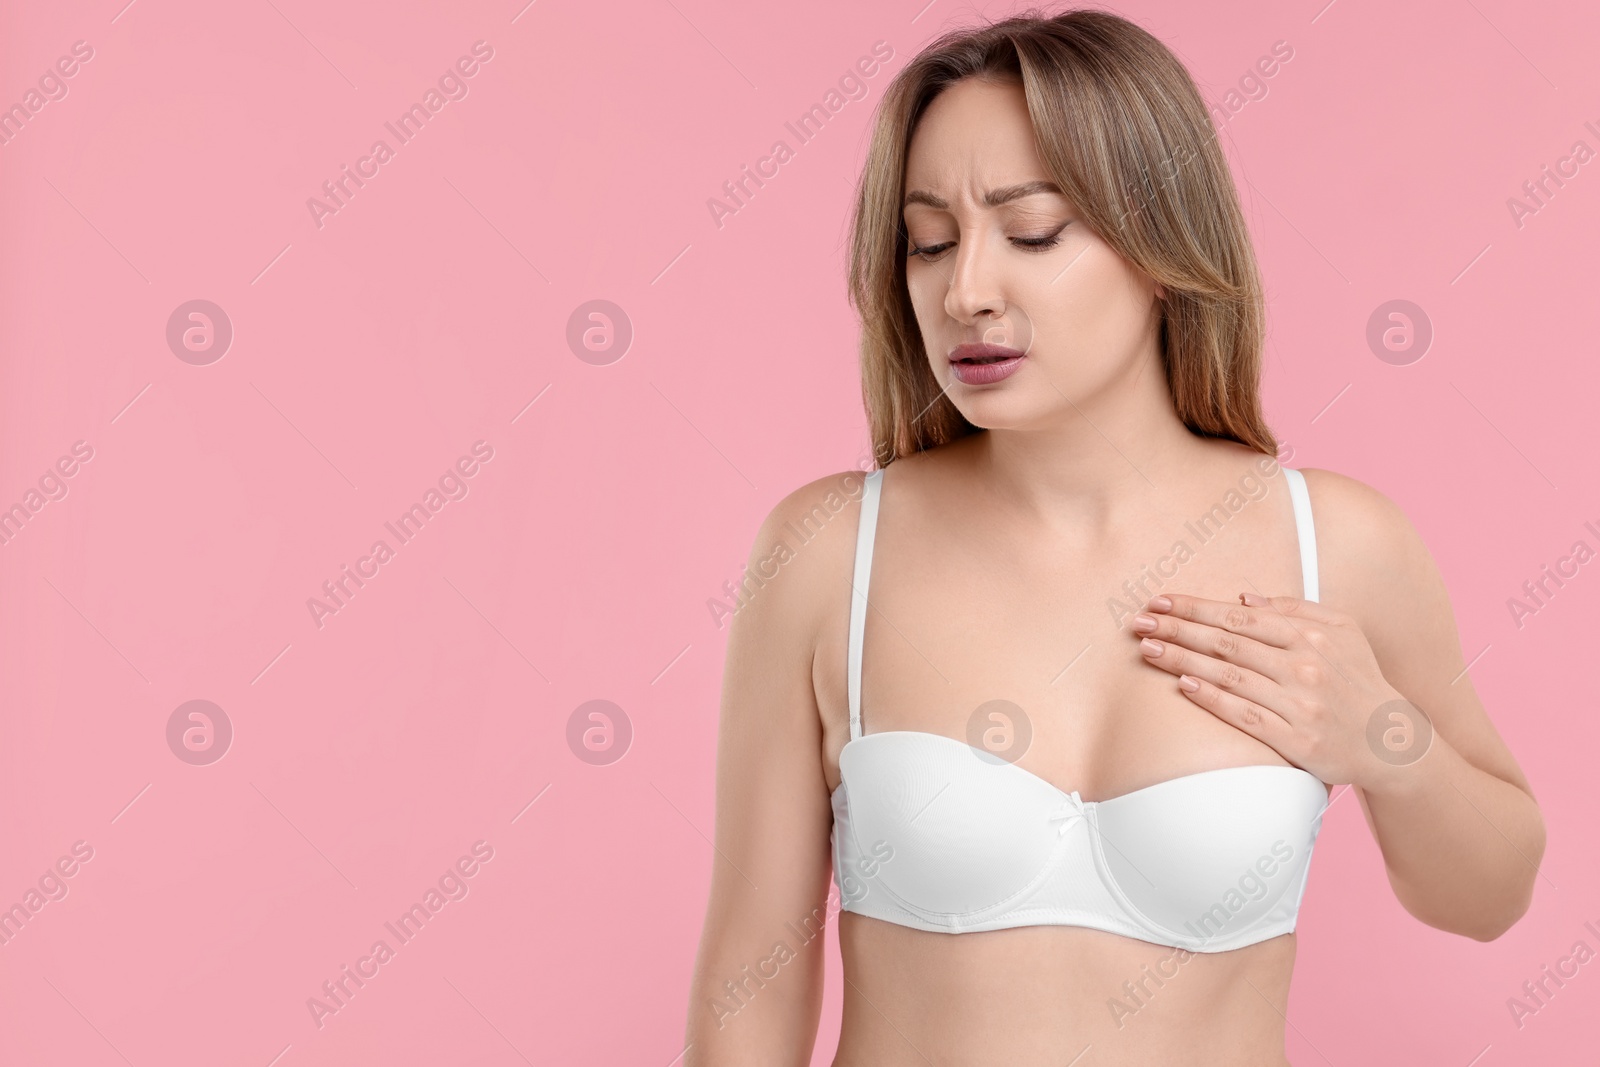 Photo of Mammology. Young woman doing breast self-examination on pink background